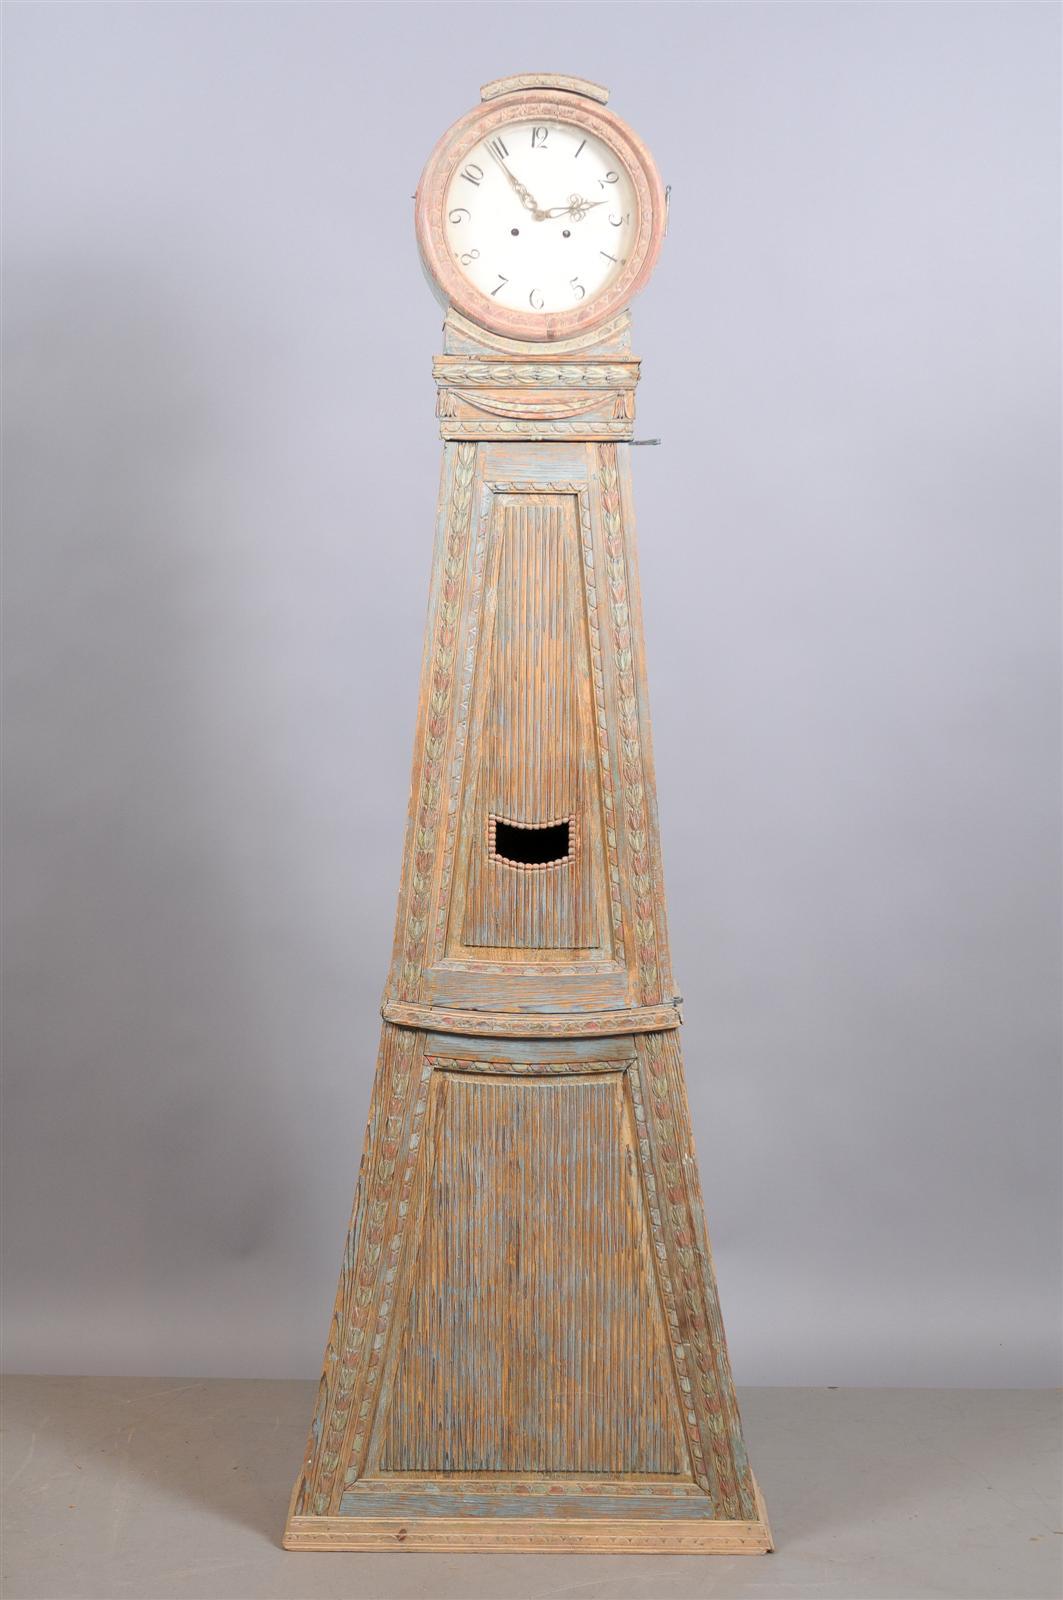 19th century Swedish painted tallcase clock with blue and rust wash finish and white enamel face, circa 1830.